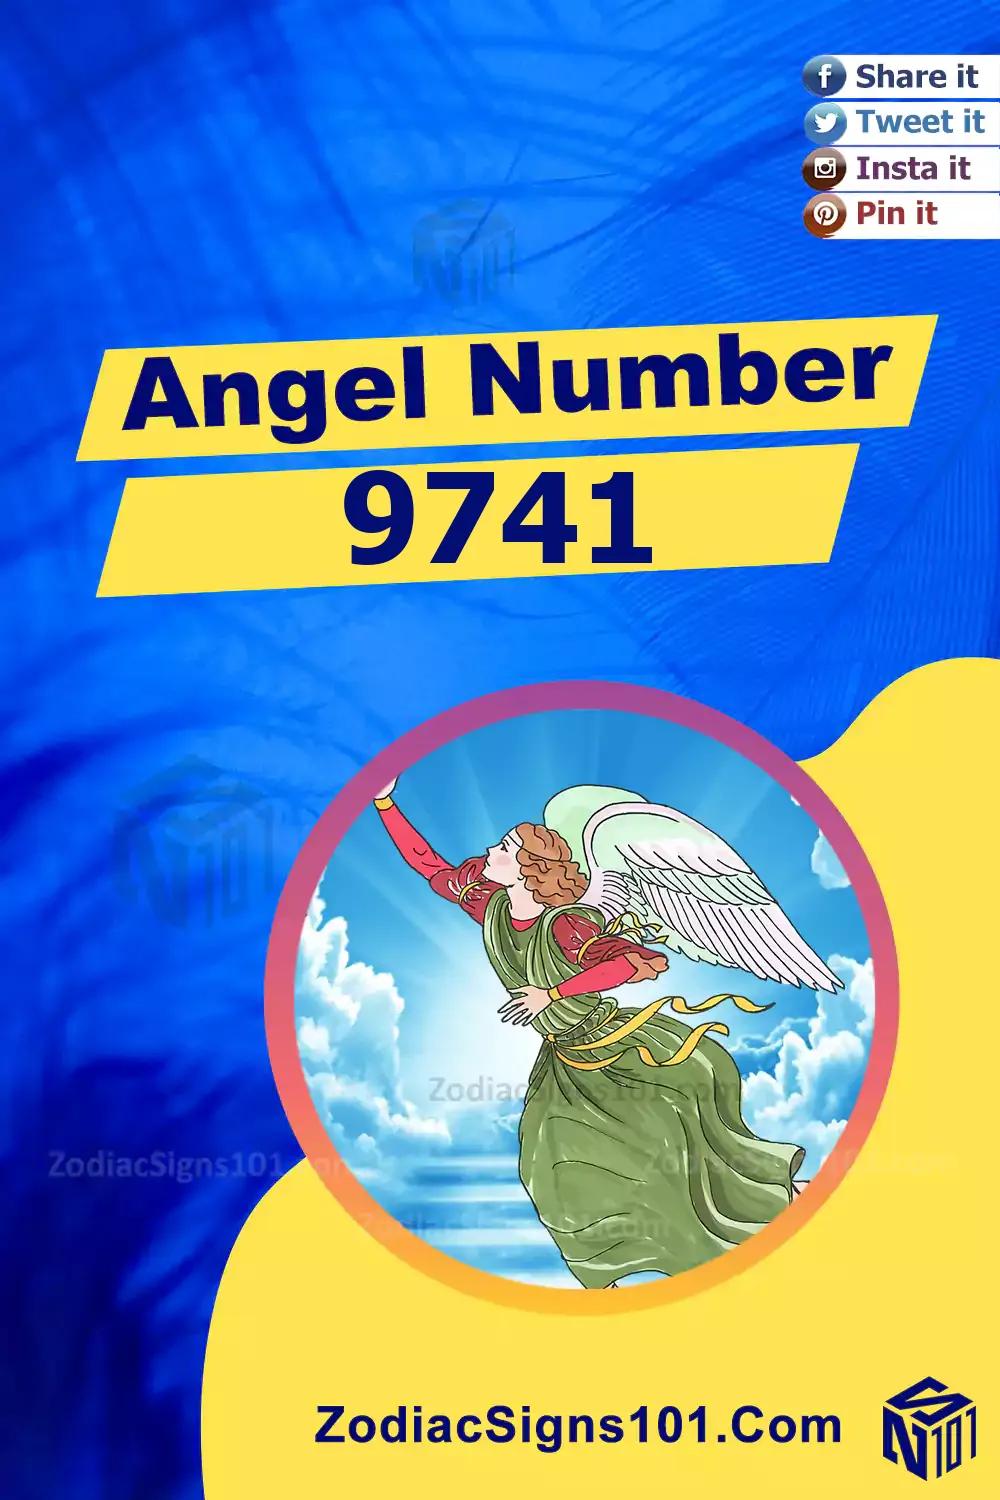 9741 Angel Number Meaning